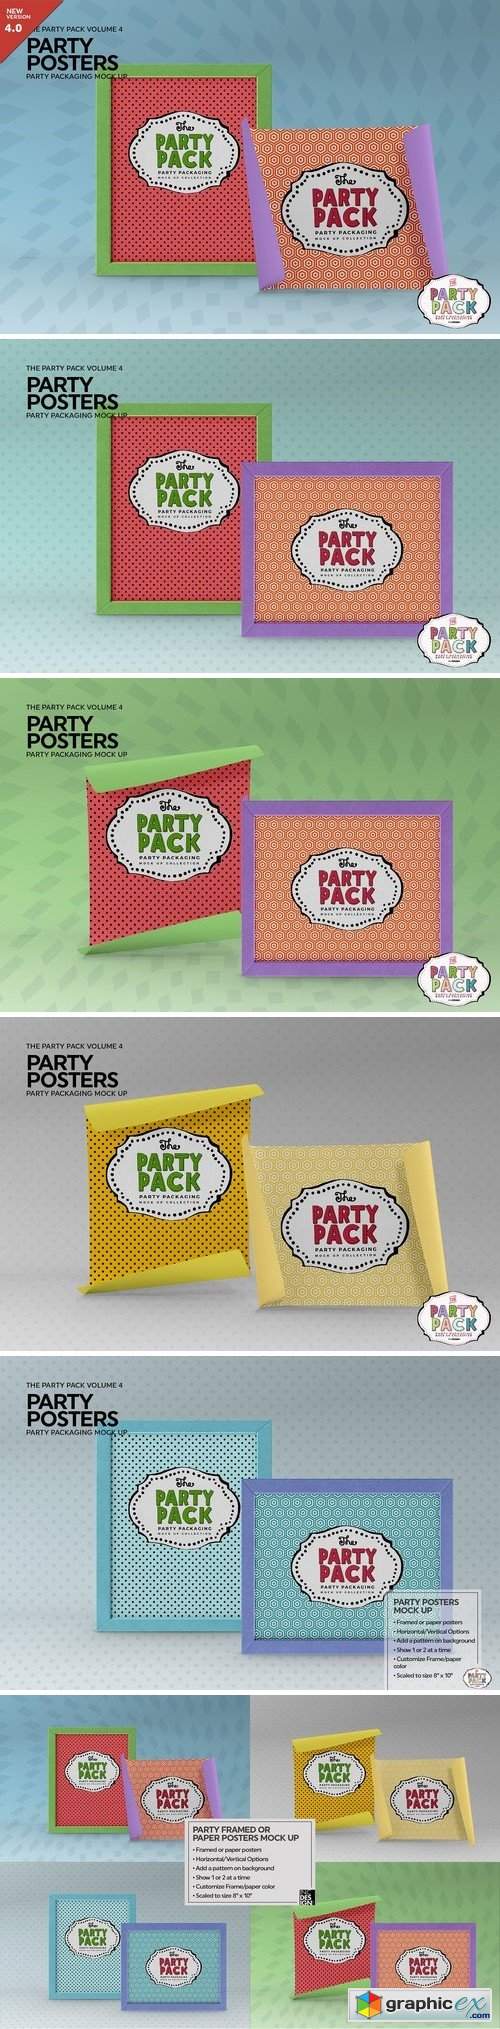 Party Posters Packaging MockUp